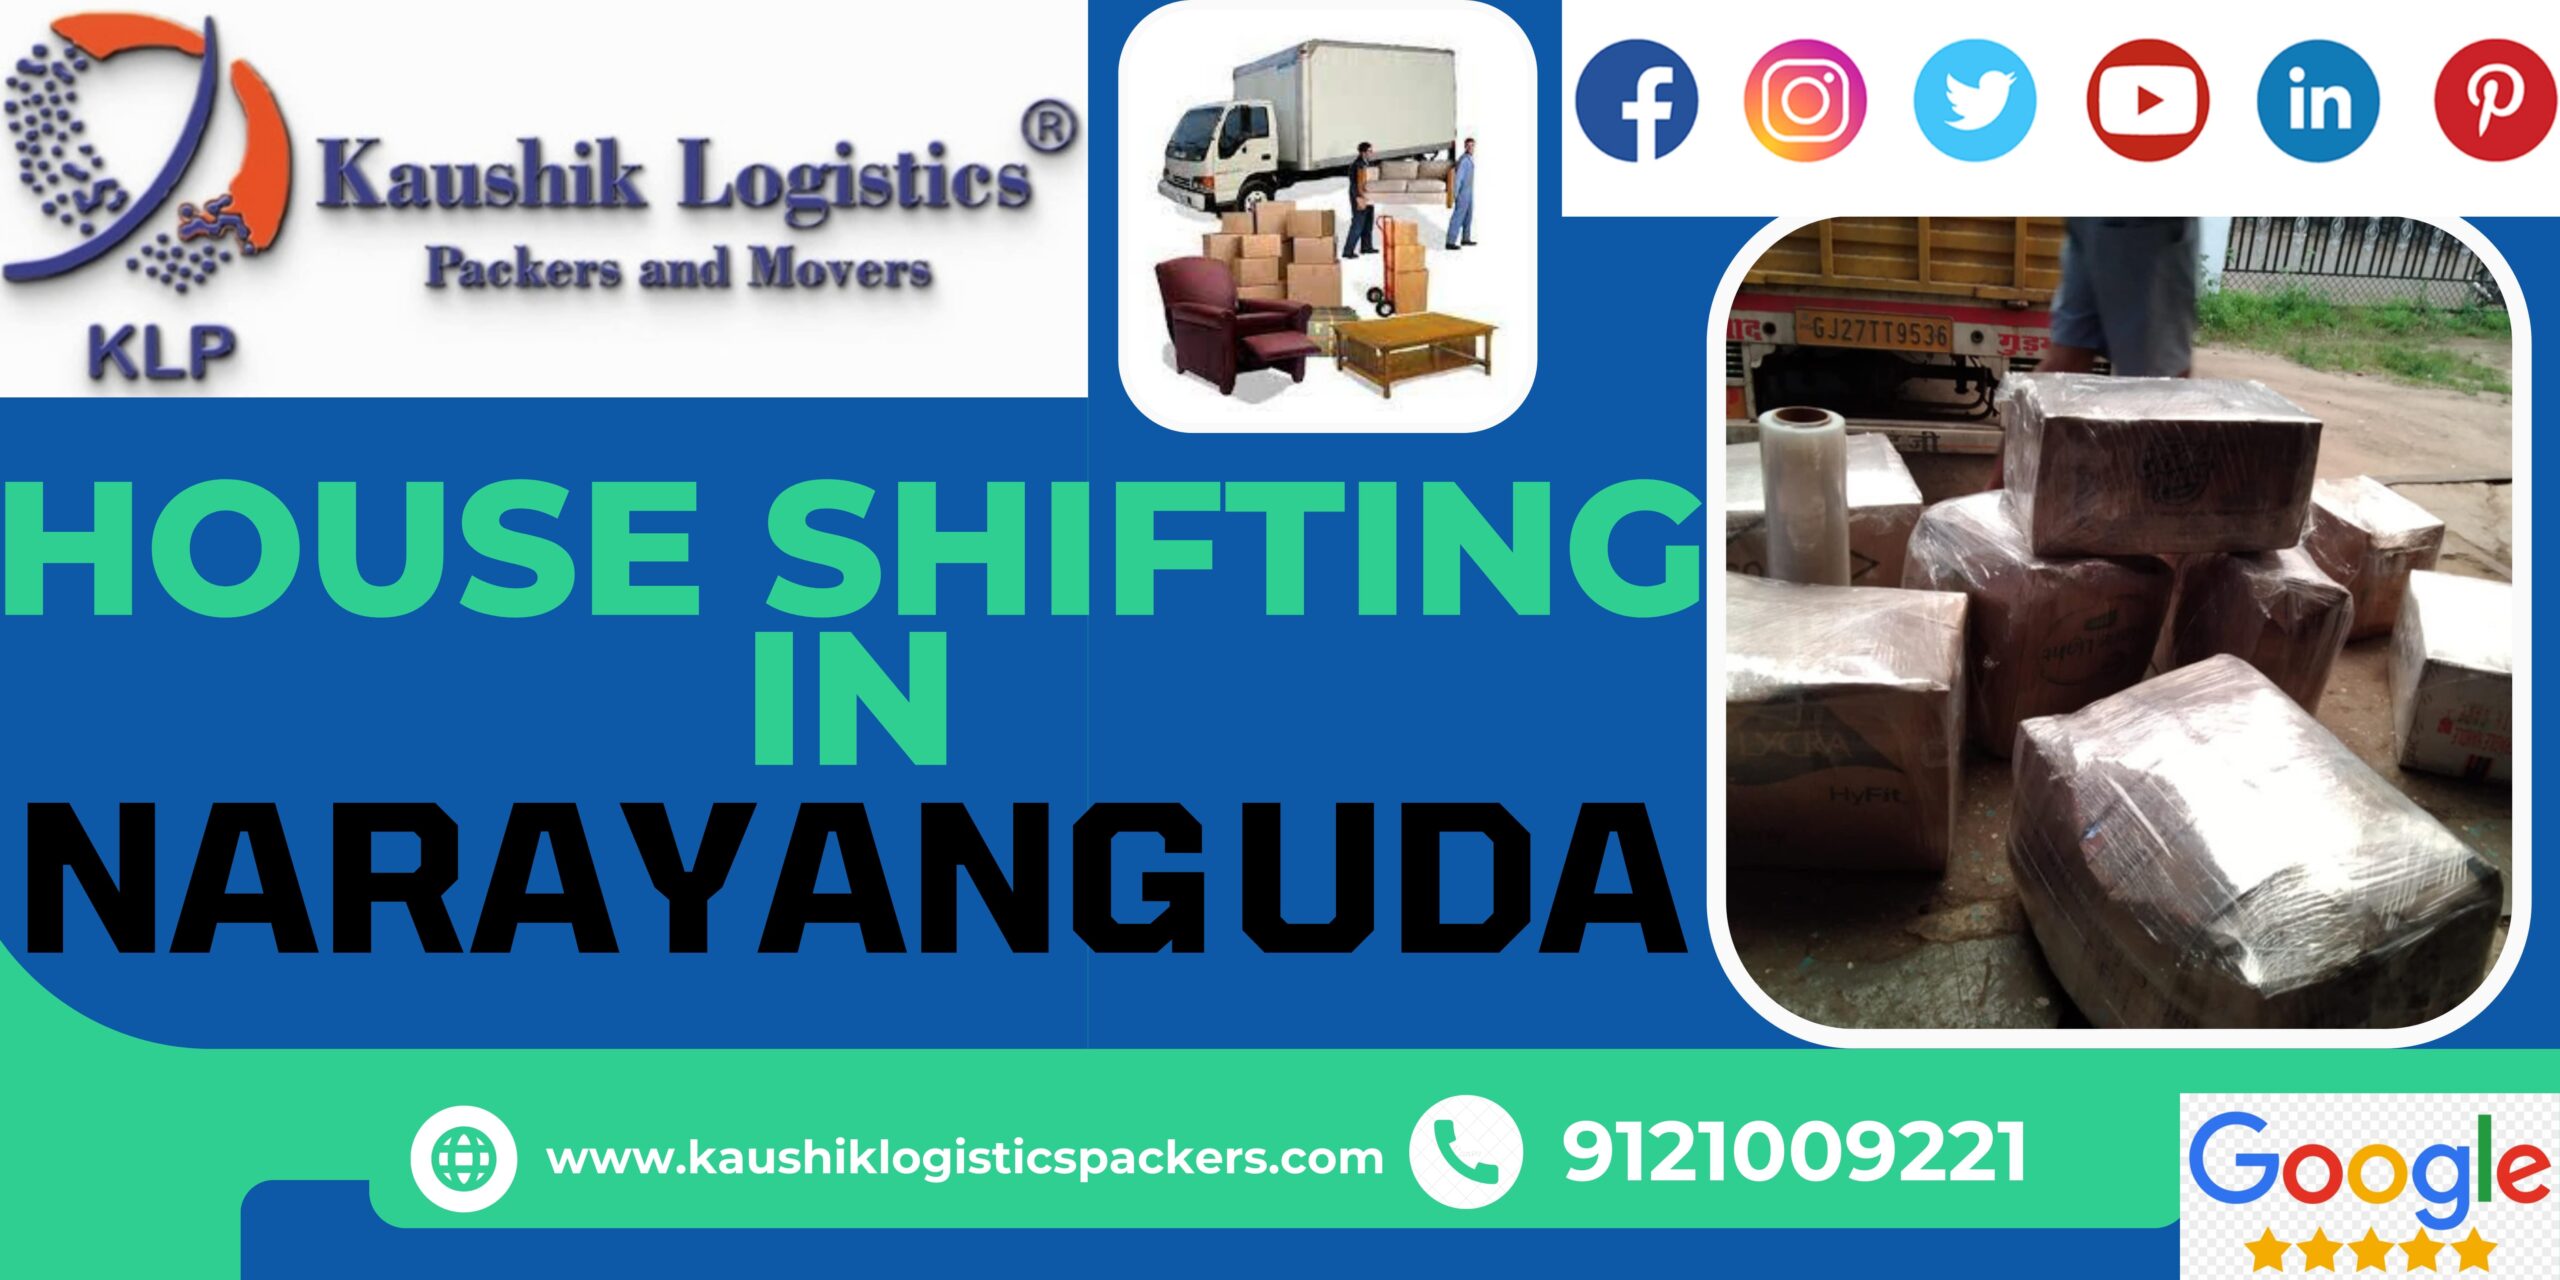 Packers and Movers In Narayanguda